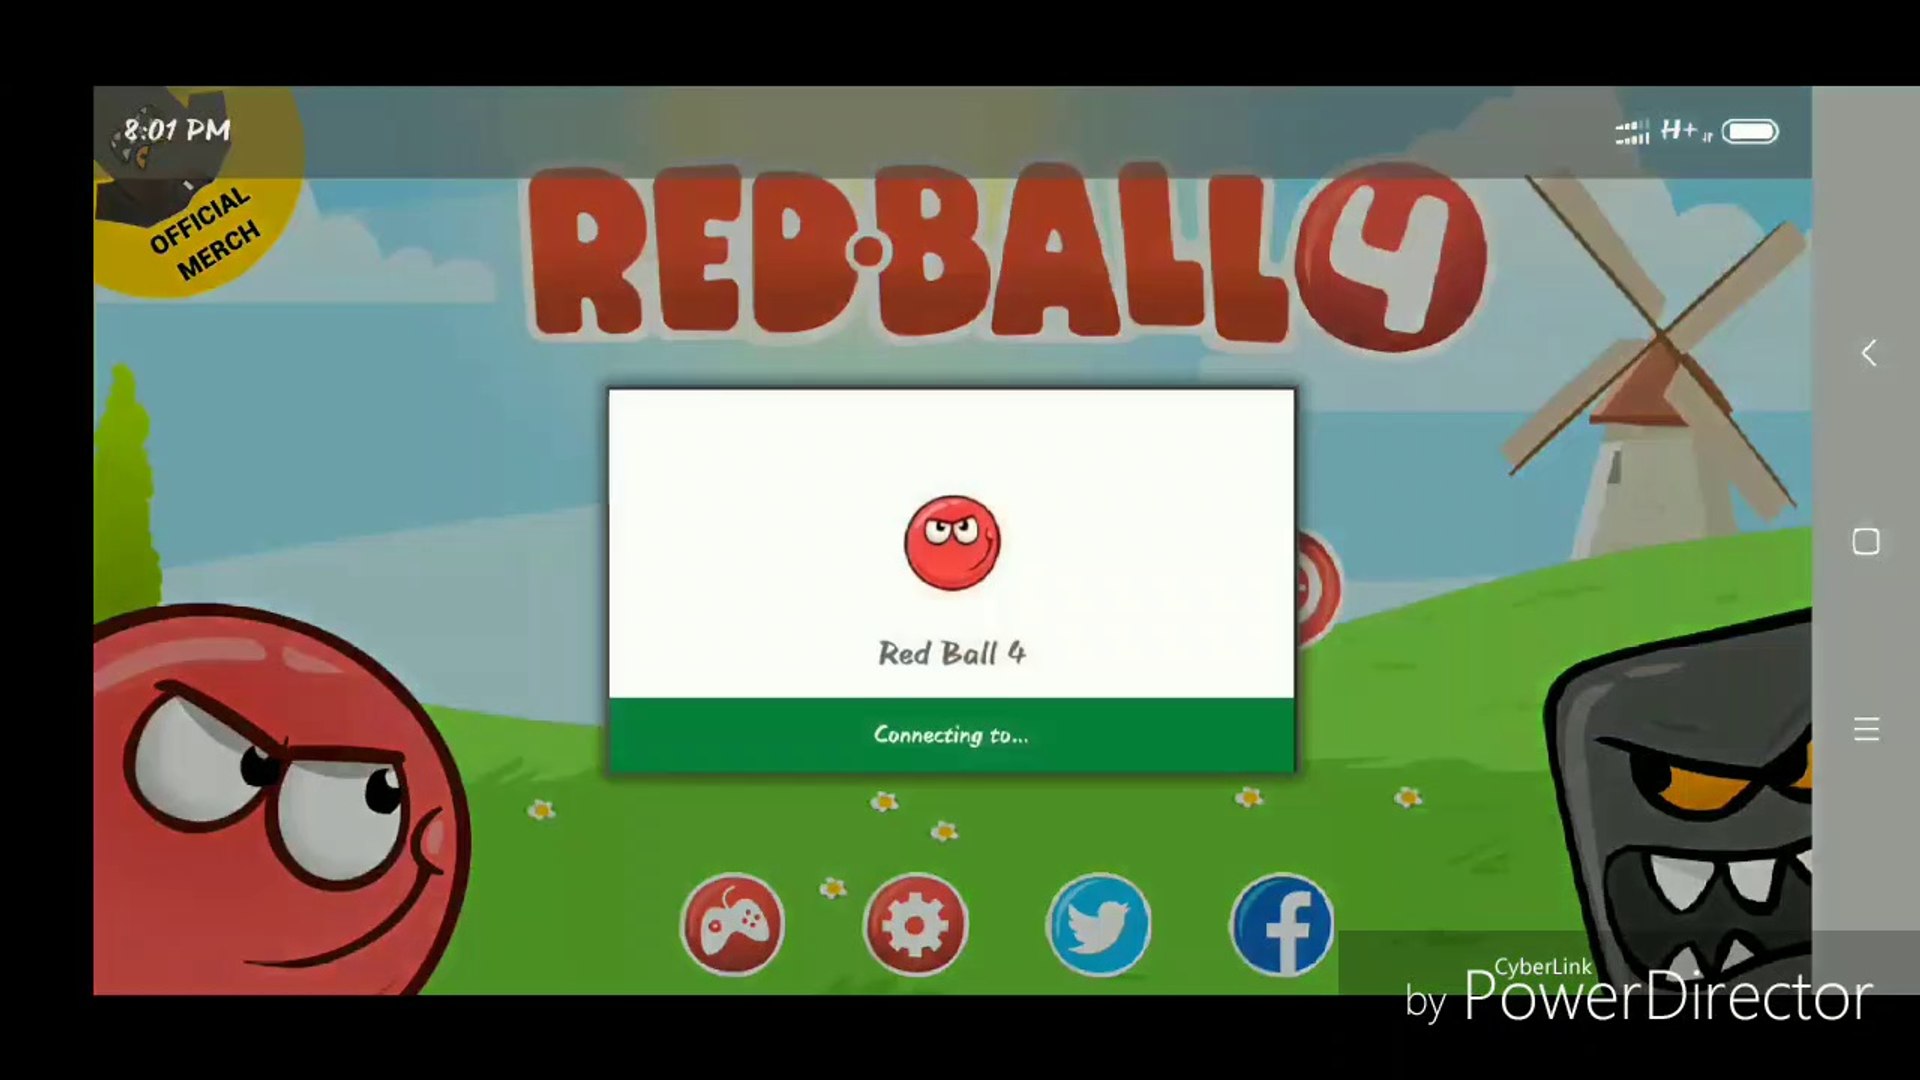 red ball 8